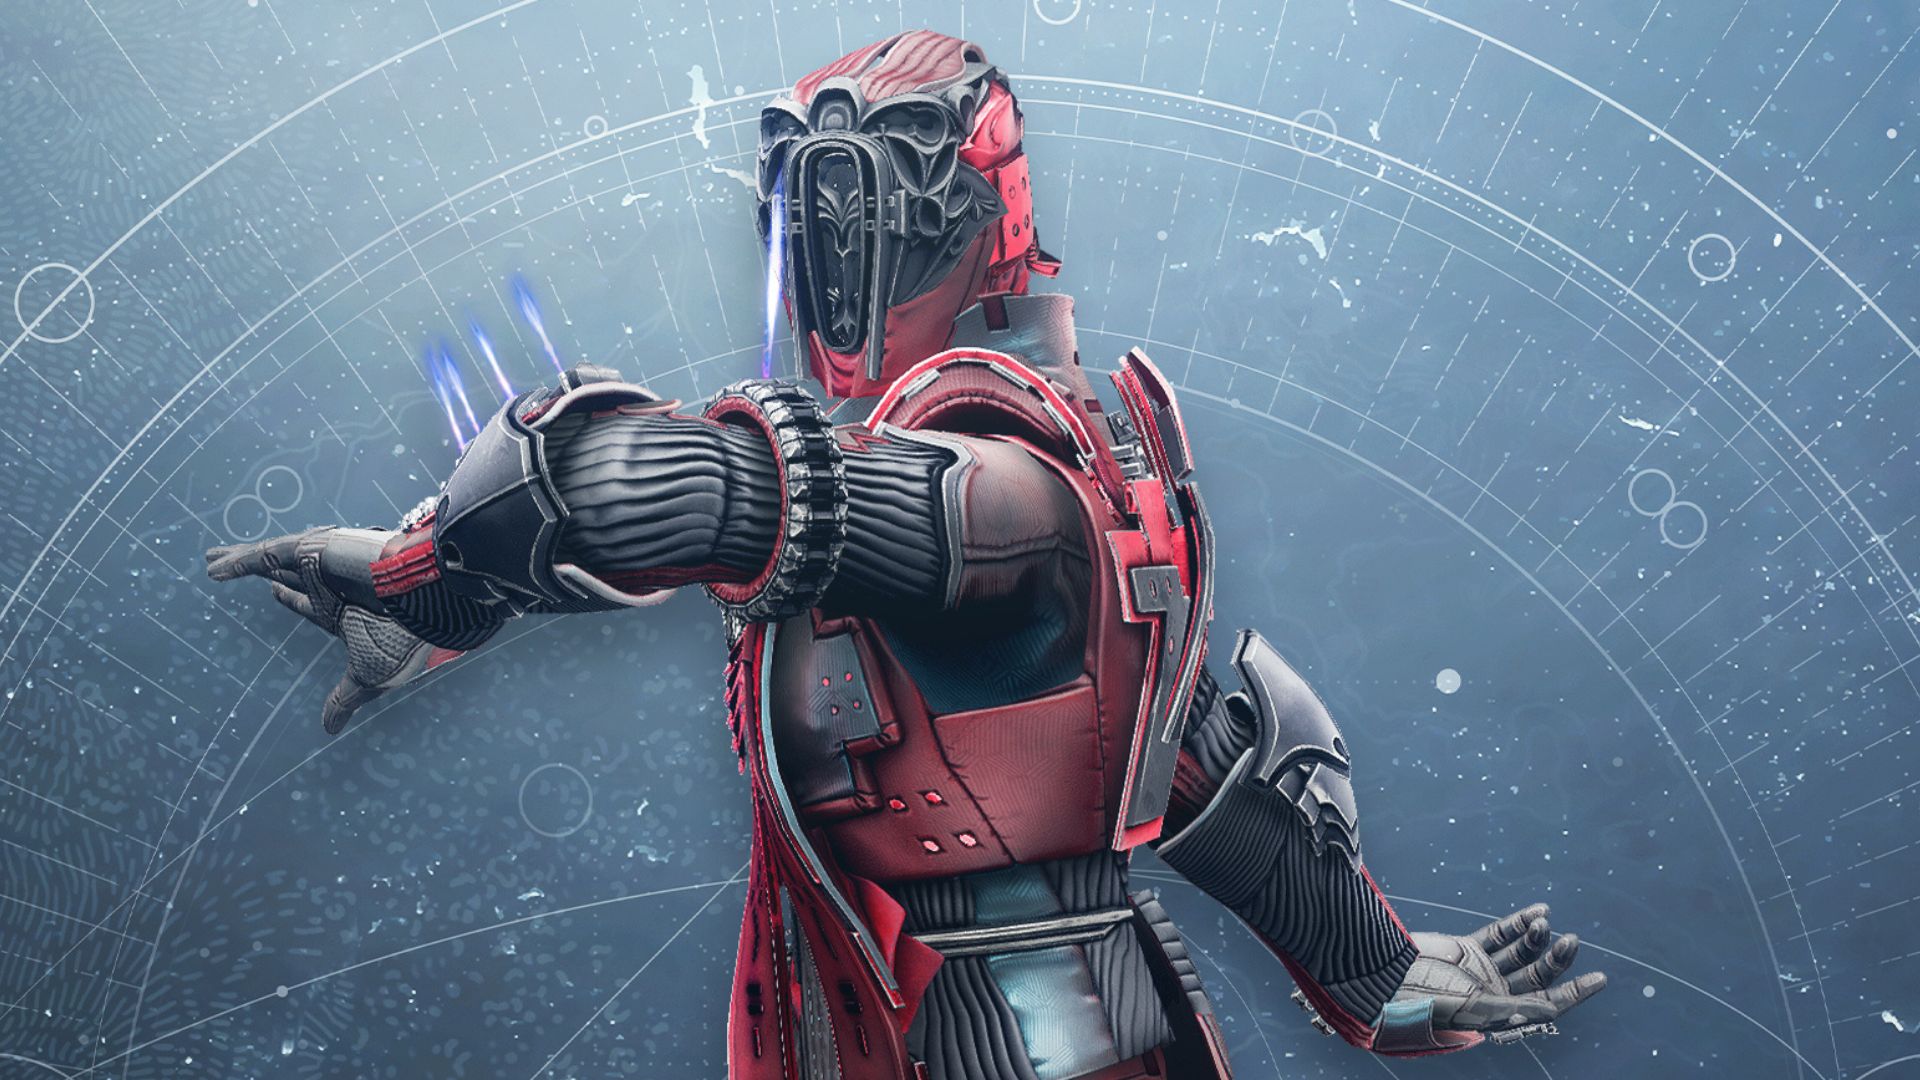 Guardians are losing Destiny 2 emotes to a bug, but Bungie is on it